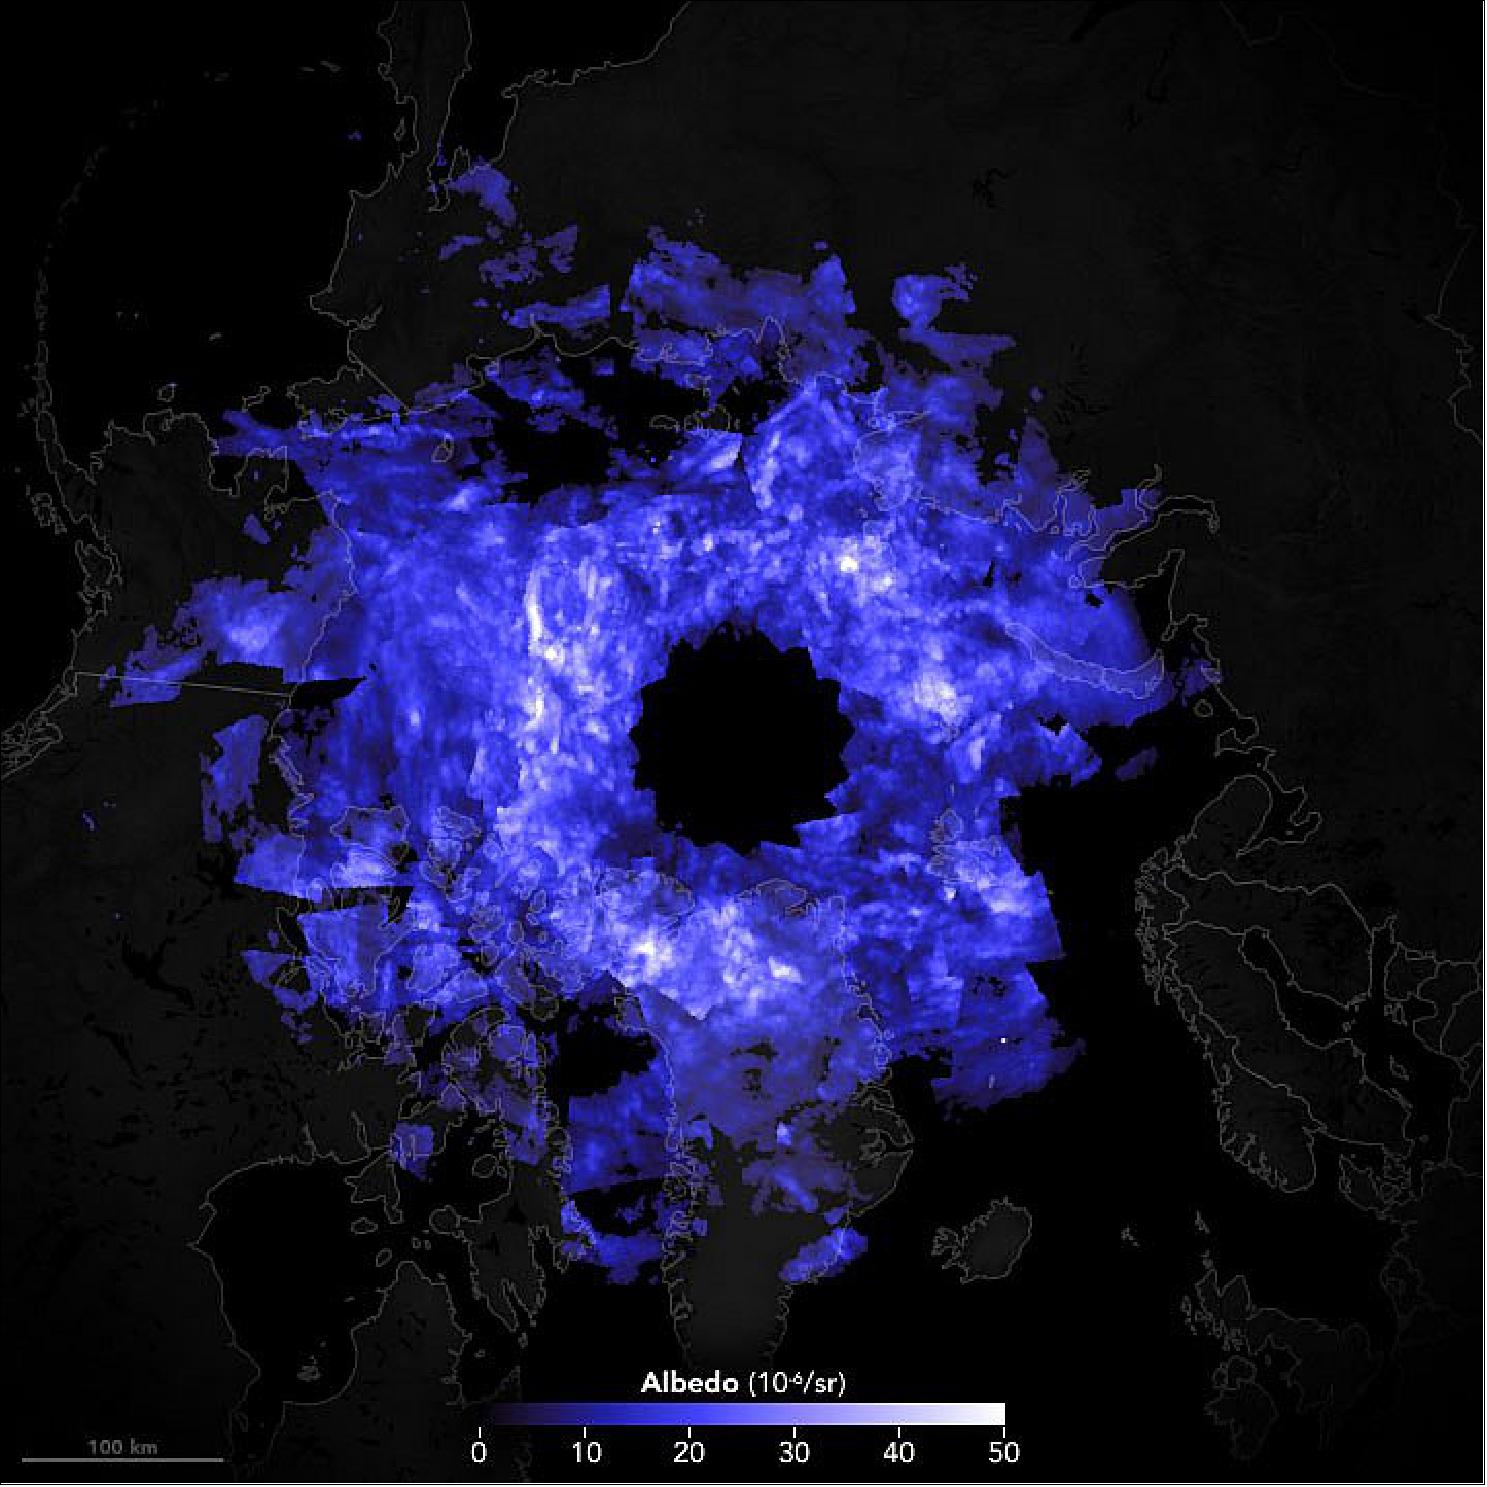 Figure 9: Noctilucent clouds form so high in the atmosphere that they continue to reflect sunlight hours after sunset, creating a spectacular nighttime display. The image shows a satellite-based view of noctilucent clouds on June 16, 2021. The image is centered on the North Pole and is stitched together from data acquired during several orbital passes by NASA’s Aeronomy of Ice in the Mesosphere (AIM) spacecraft. The satellite’s Cloud Imaging and Particle Size (CIPS) instrument measures albedo, or the amount of light reflected back to space by the clouds. Researchers use data from AIM to better understand the complexities of the mesosphere, and its relationship to other parts of the atmosphere, weather, and climate (image credit: NASA Earth Observatory image by Joshua Stevens, using data from the University of Colorado Laboratory for Atmospheric and Space Physics. Story and photograph by Kathryn Hansen)